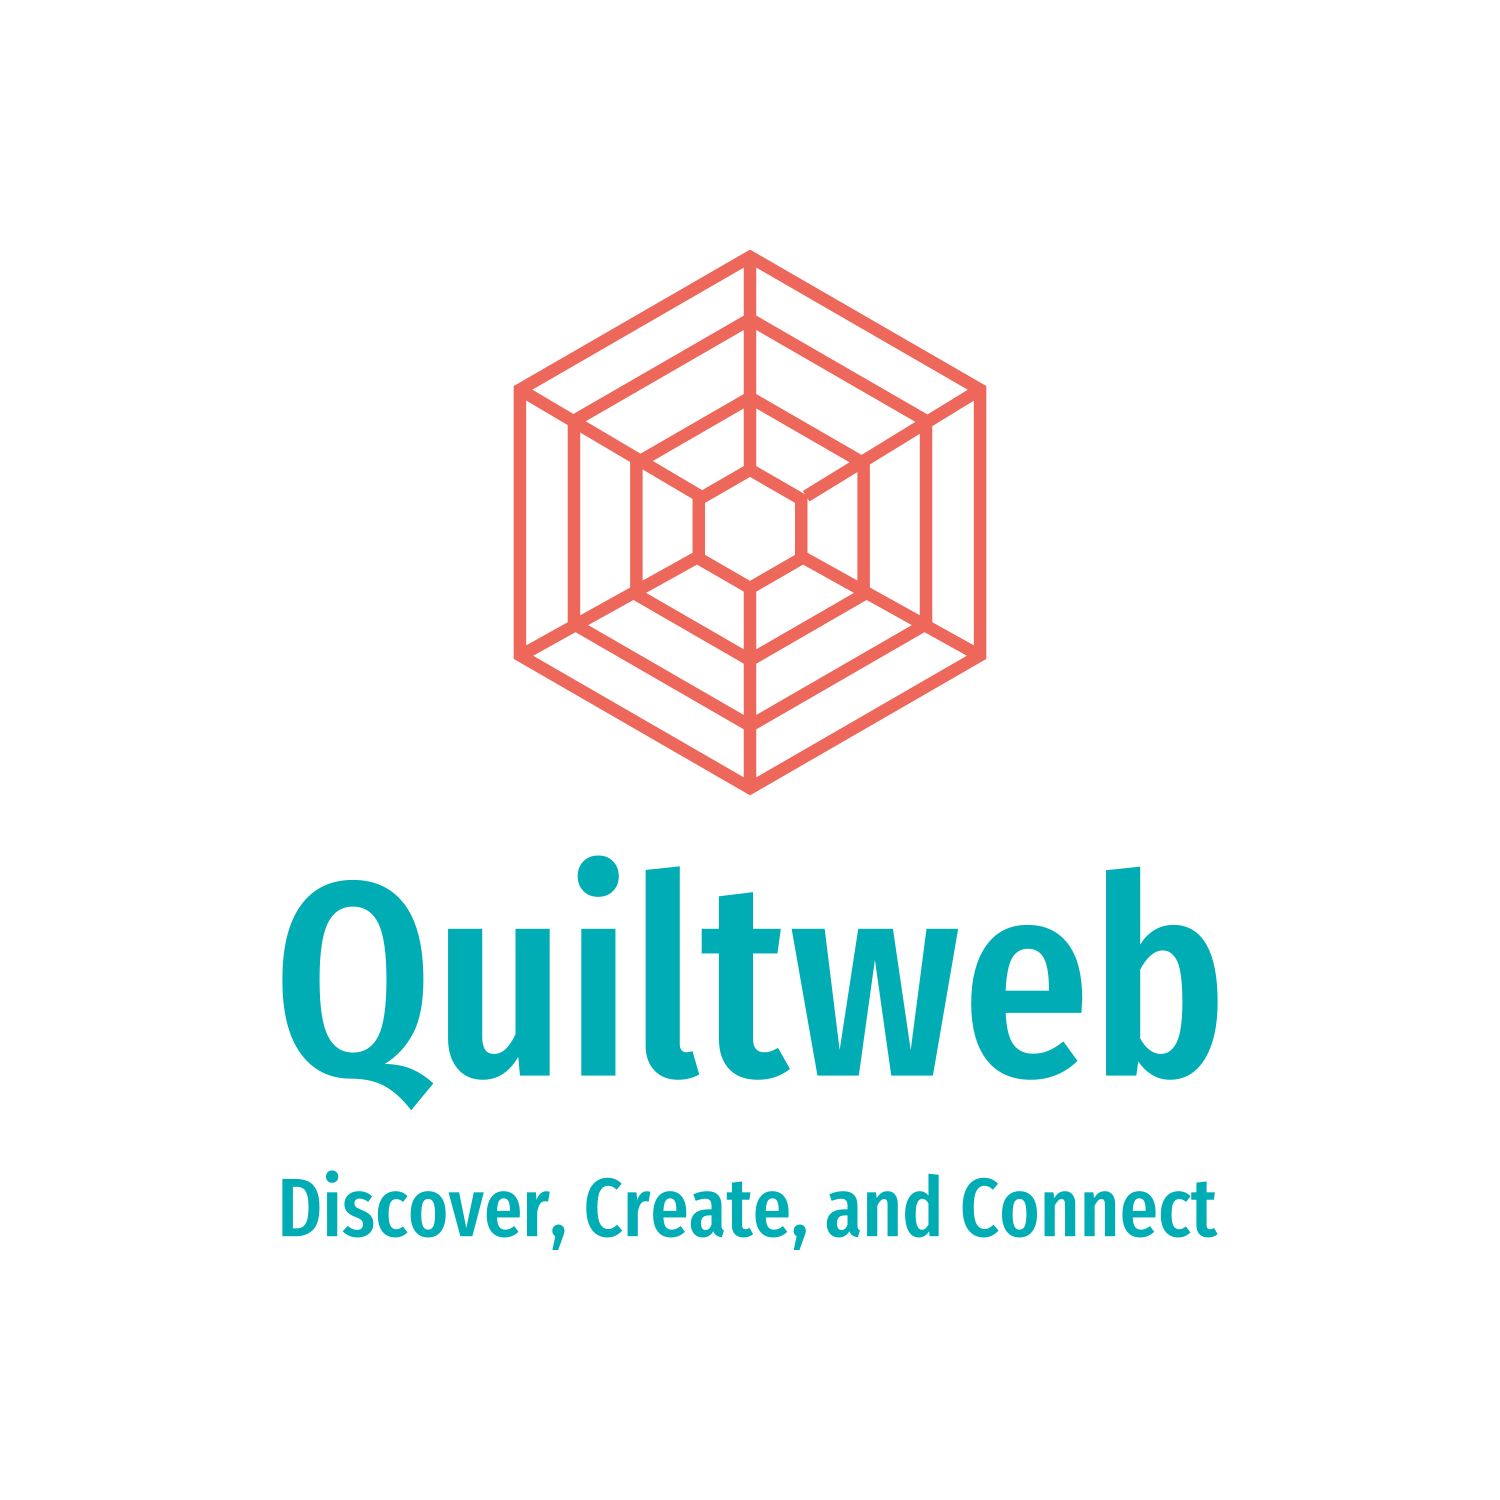 Quiltweb logo with tagline "Discover, Create, and Connect"